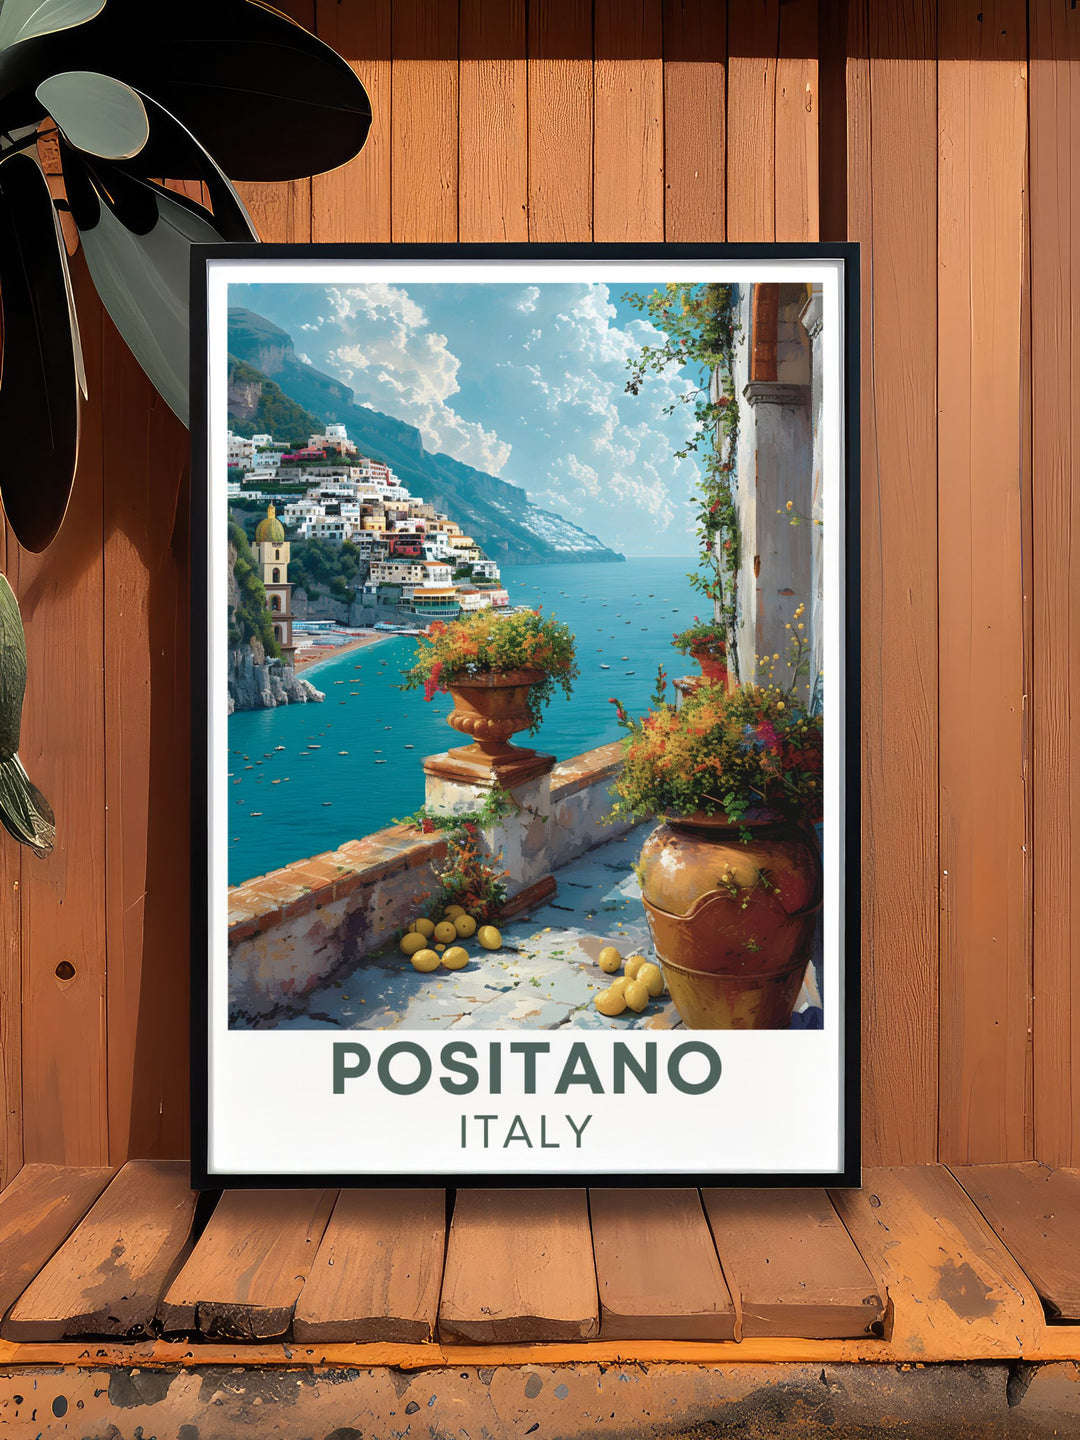 Discover the elegance of Positano with this fine print of Via Positanesi dAmerica, an exquisite piece of wall art that brings the charm and beauty of the Amalfi Coast into your home, perfect for Italy Wall Art lovers.